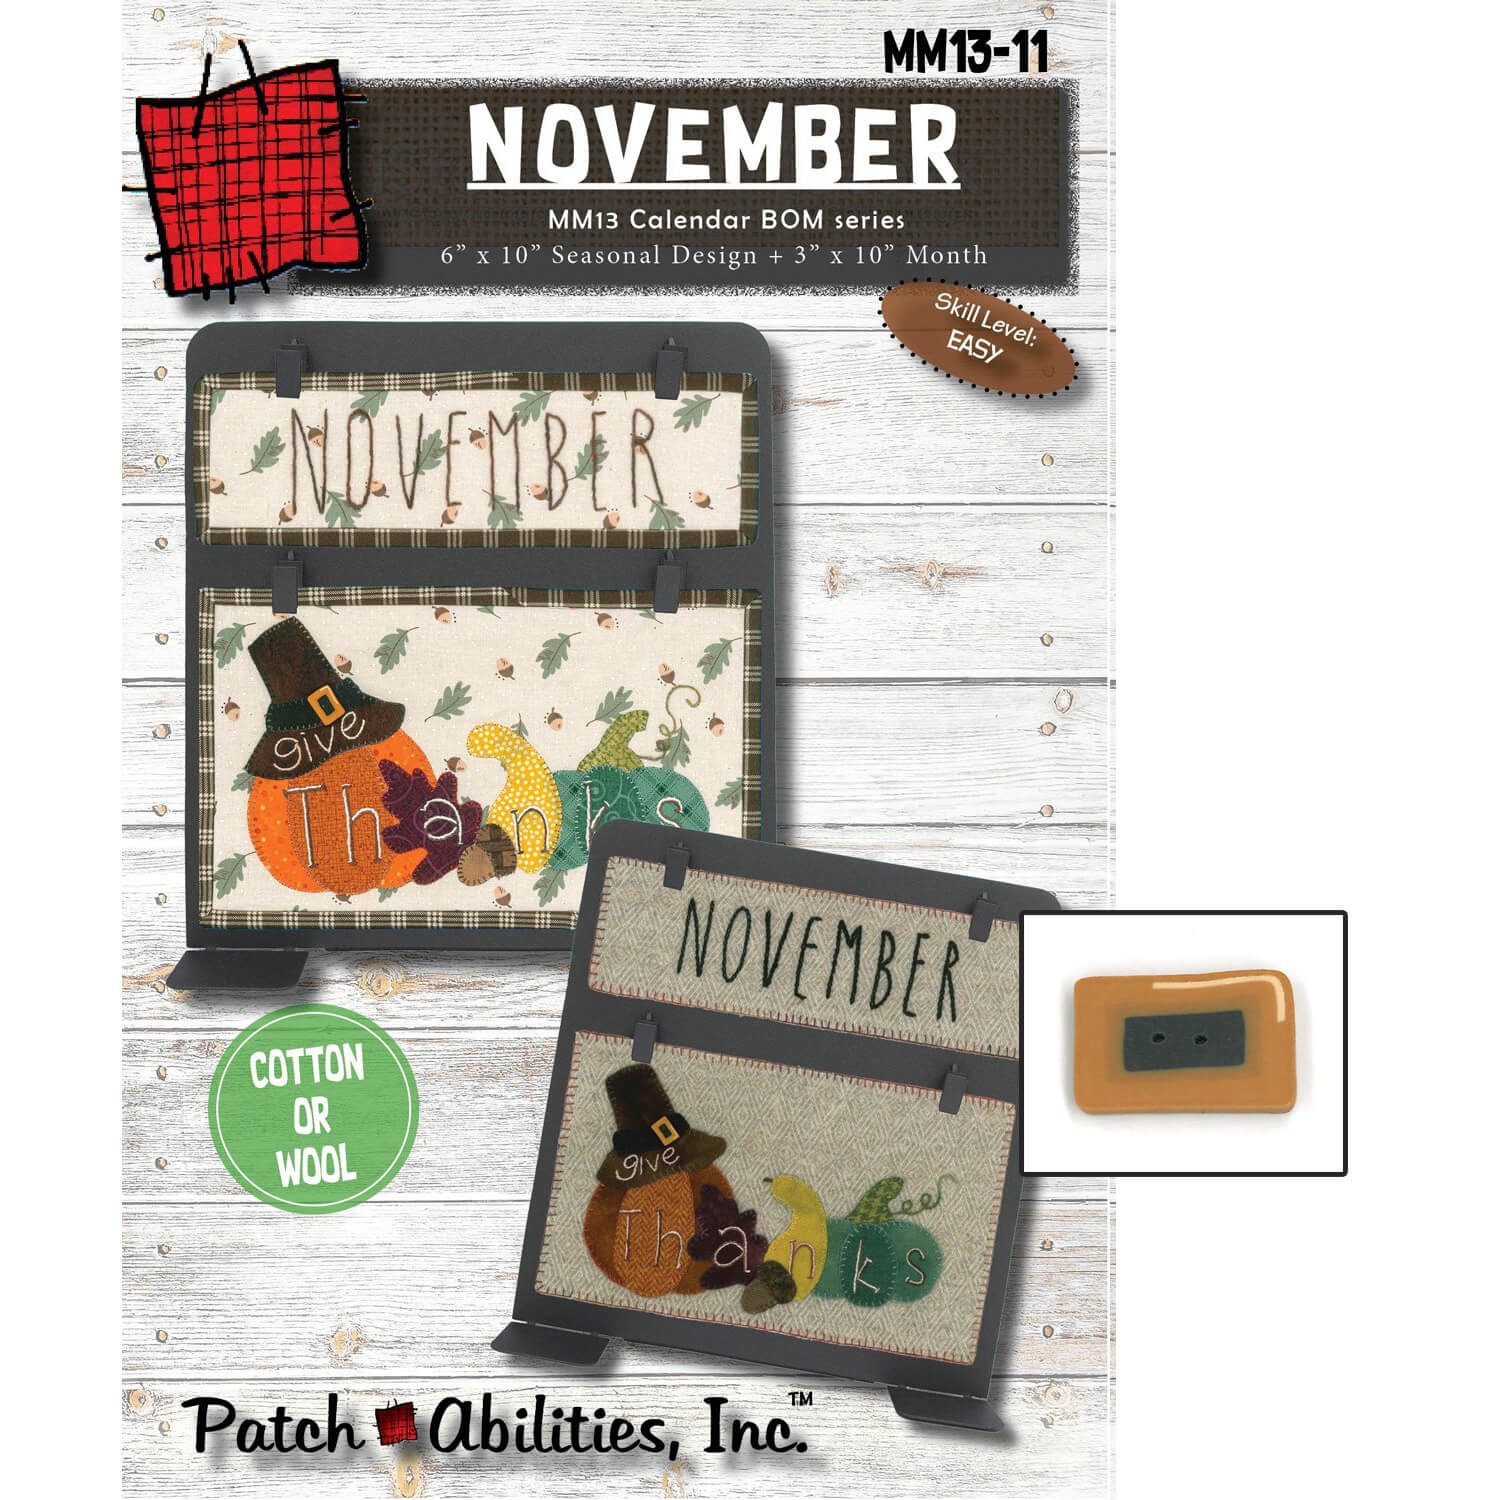 NEW!  Patch Abilities Appliqued Wall Hanging Patterns and Hardware at ShopNZP.com! 